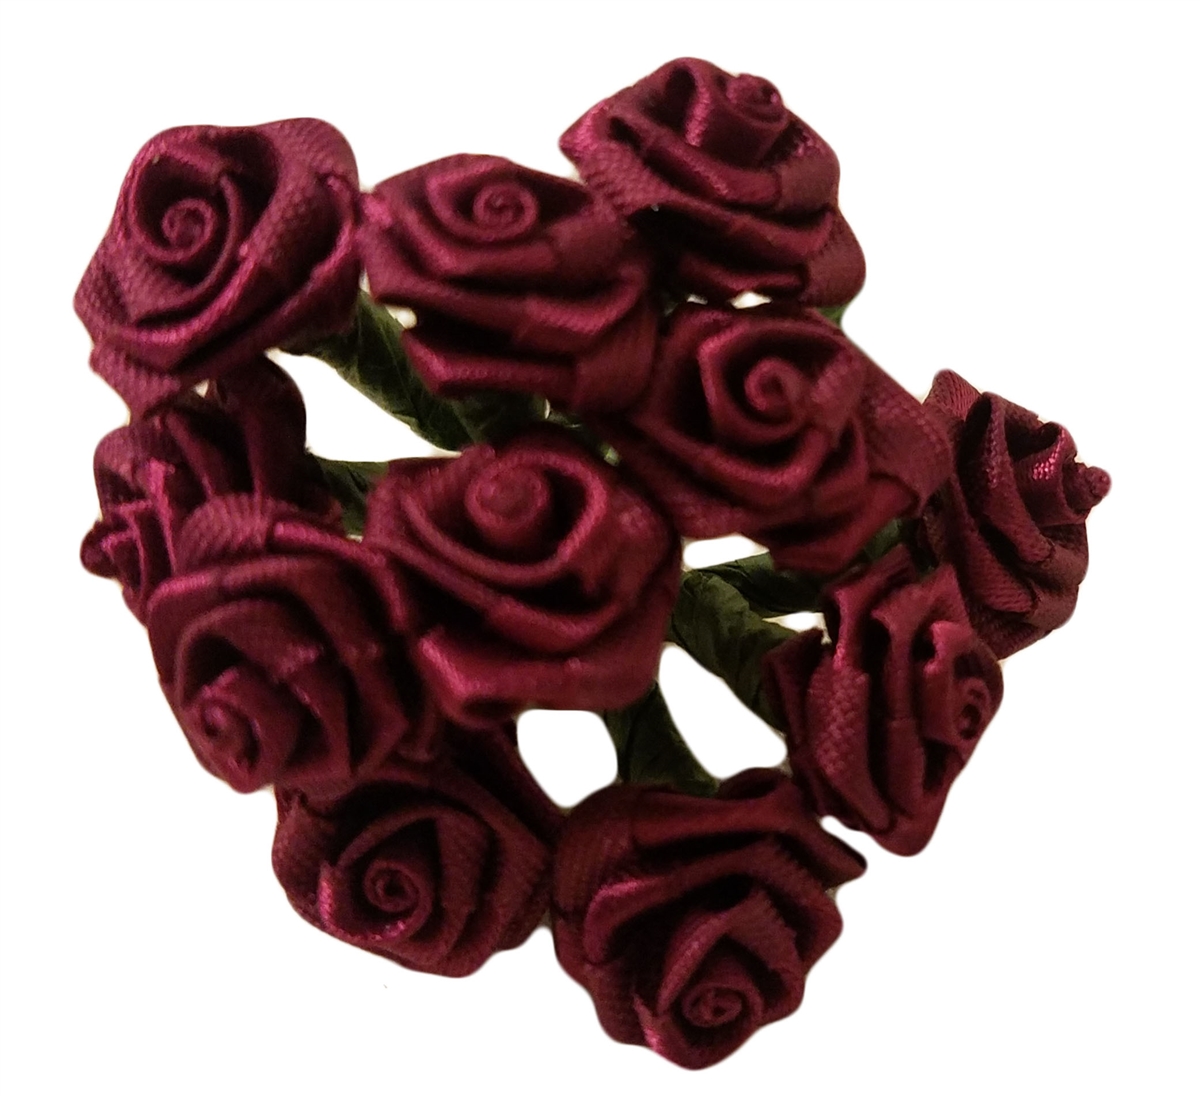 10mm (3/8 inch) Satin Ribbon Roses (144 pieces)